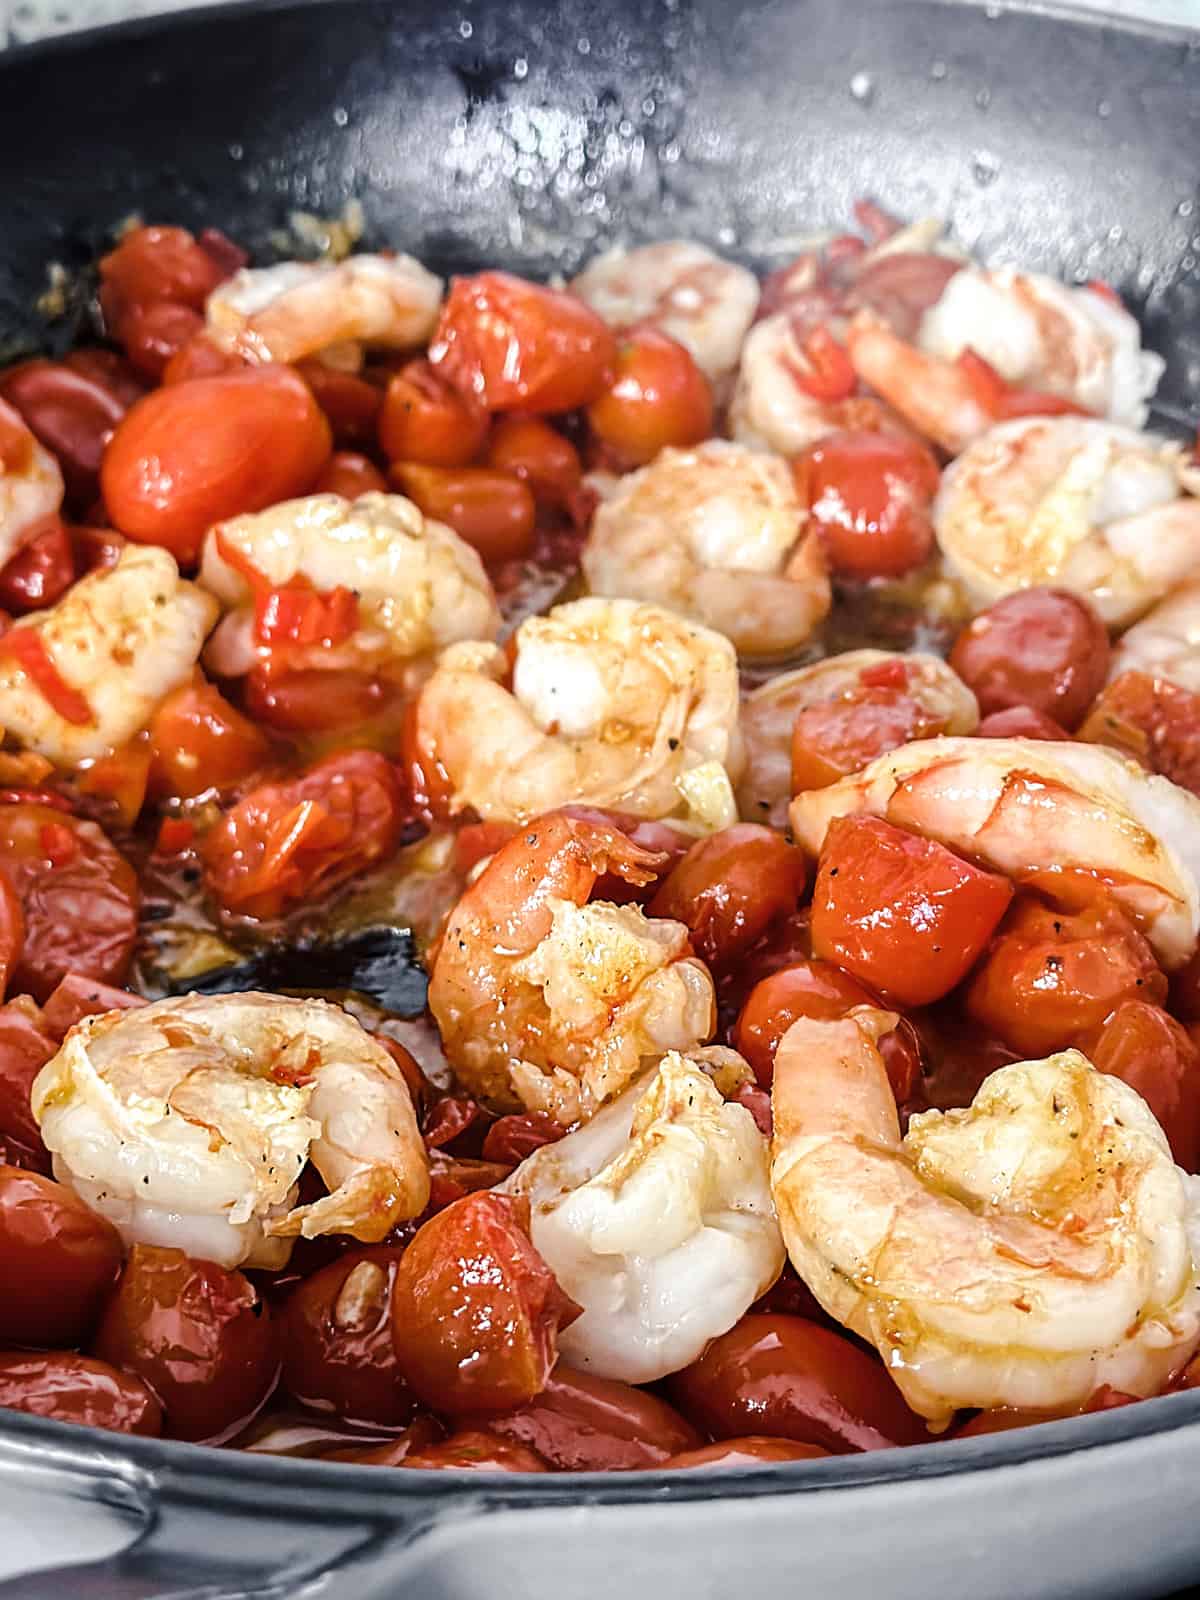 Cherry tomatoes, shrimp, chopped garlic and chili peppers in olive oil in a large deep sauté pan.